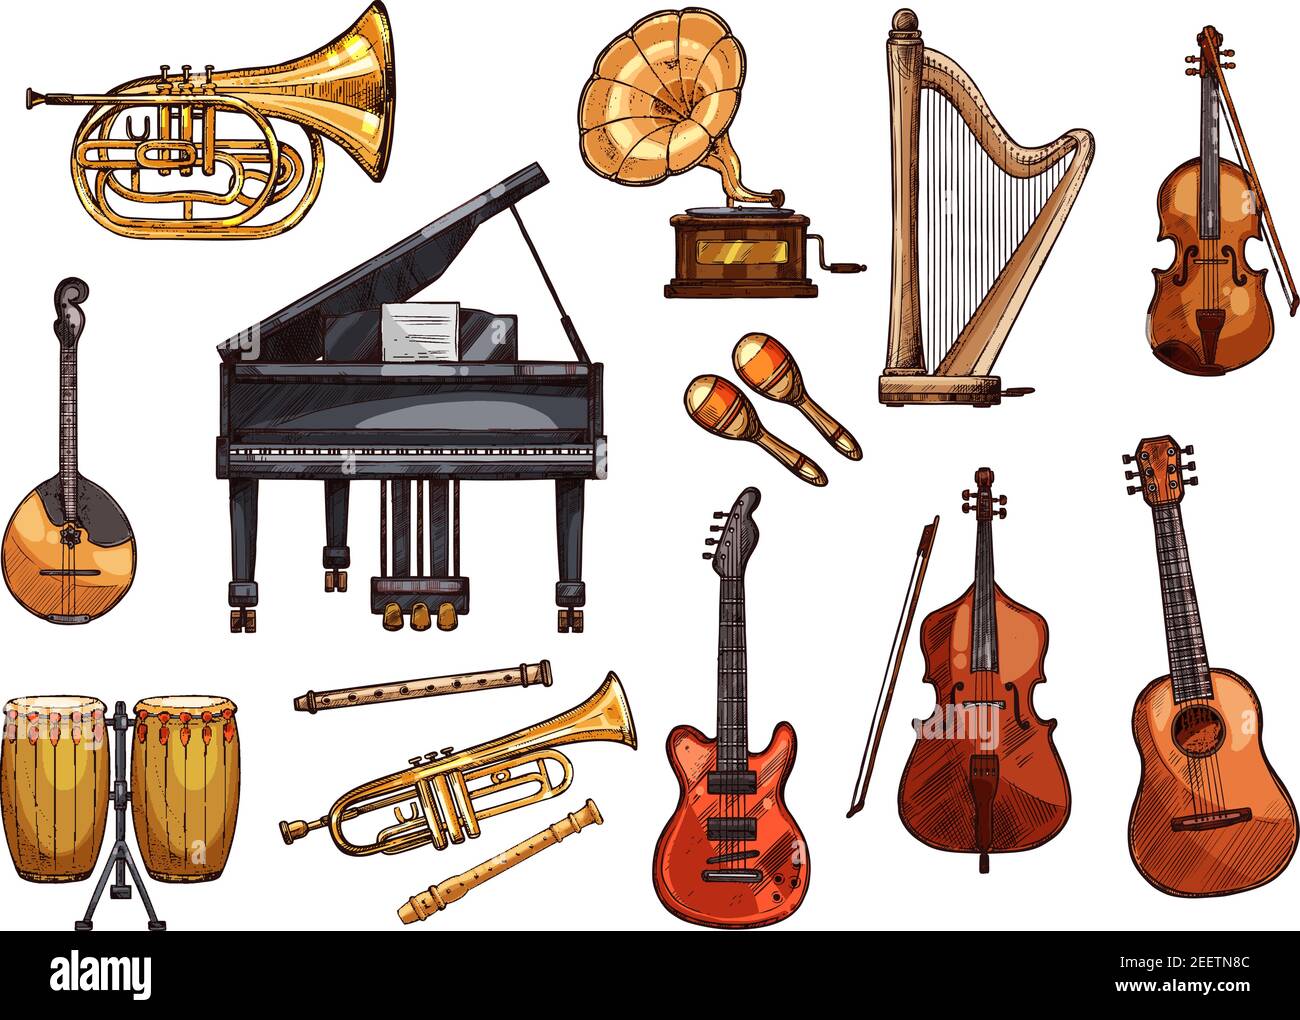 Musical Instruments Vector Sketch Icons Collection | Musical instruments  drawing, Sketch icon, Jazz instruments